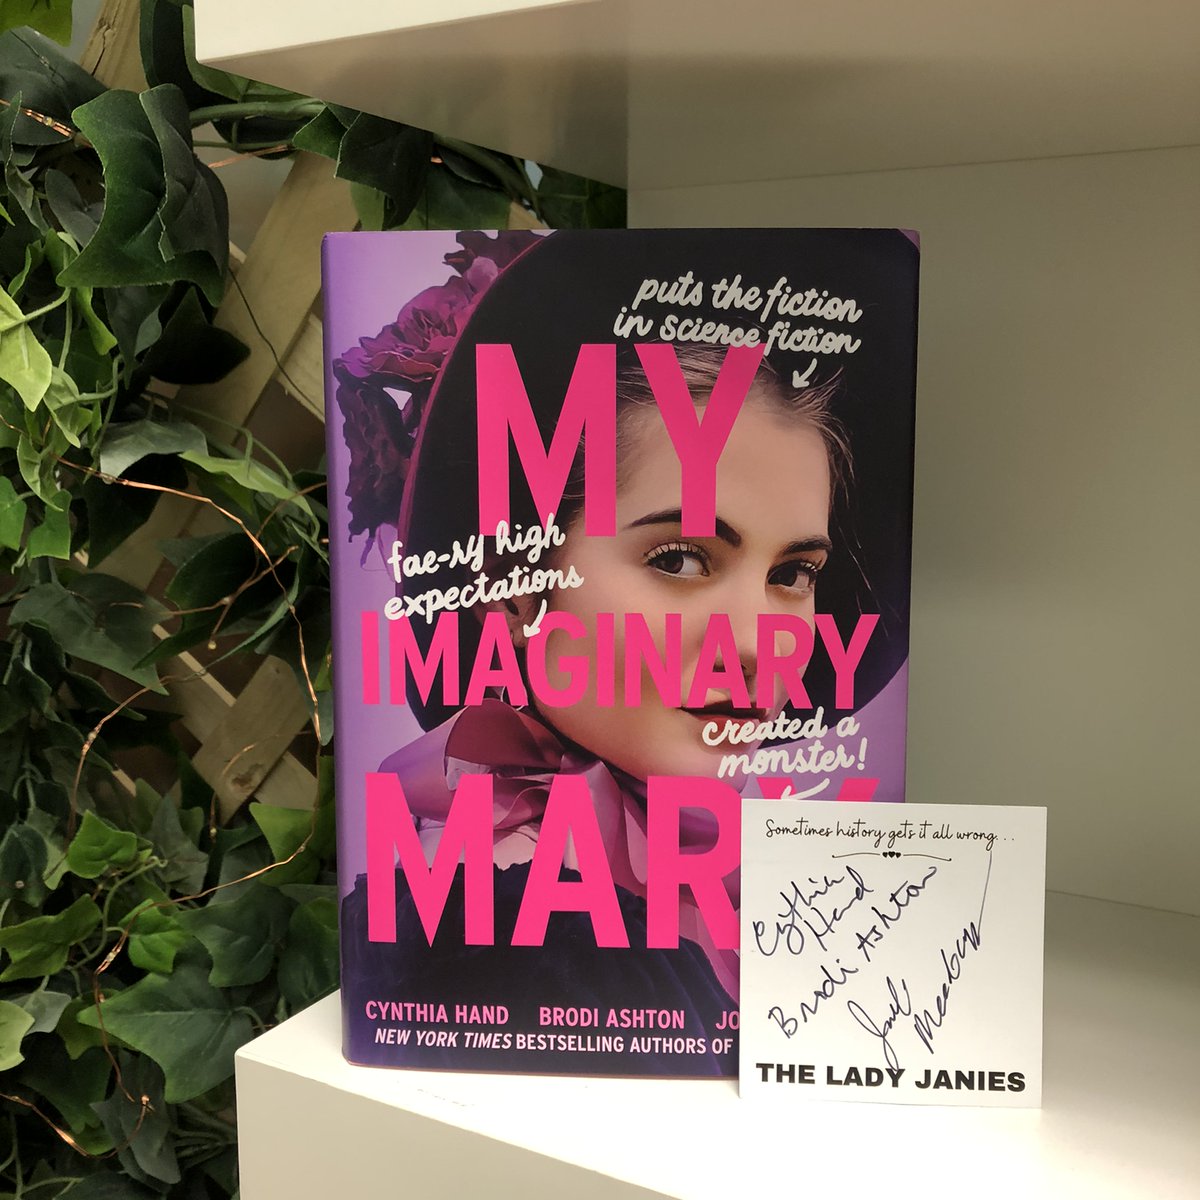 It's out today (it's alive!) - MY IMAGINARY MARY by the @ladyjanies - @jodimeadows, @CynthiaHand & @brodiashton! And we've got bookplates signed by all 3 of these talented & clever authors. We love all the books: MY LADY JANE, MY PLAIN JANE, CALAMITY JANE, & MY CONTRARY MARY.